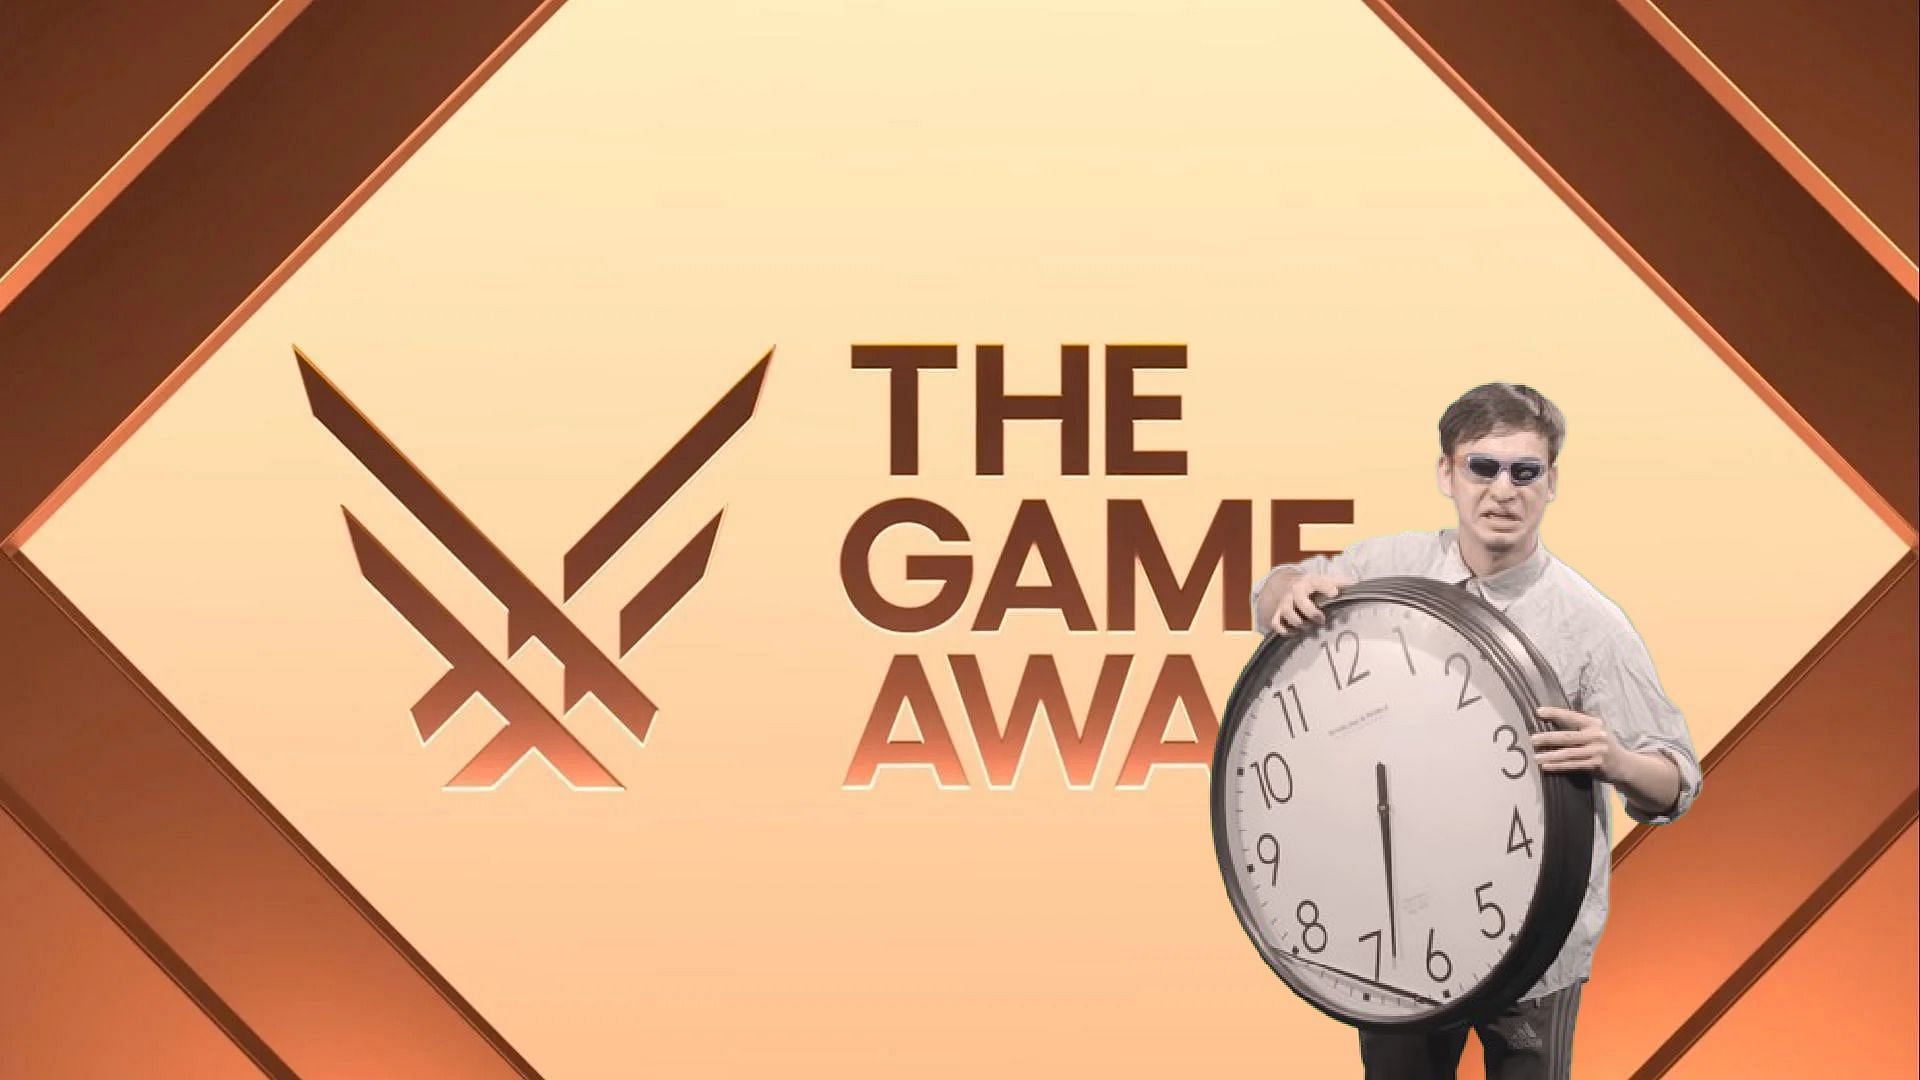 The Game Awards 2019 Viewership Increased 73% From Last Year